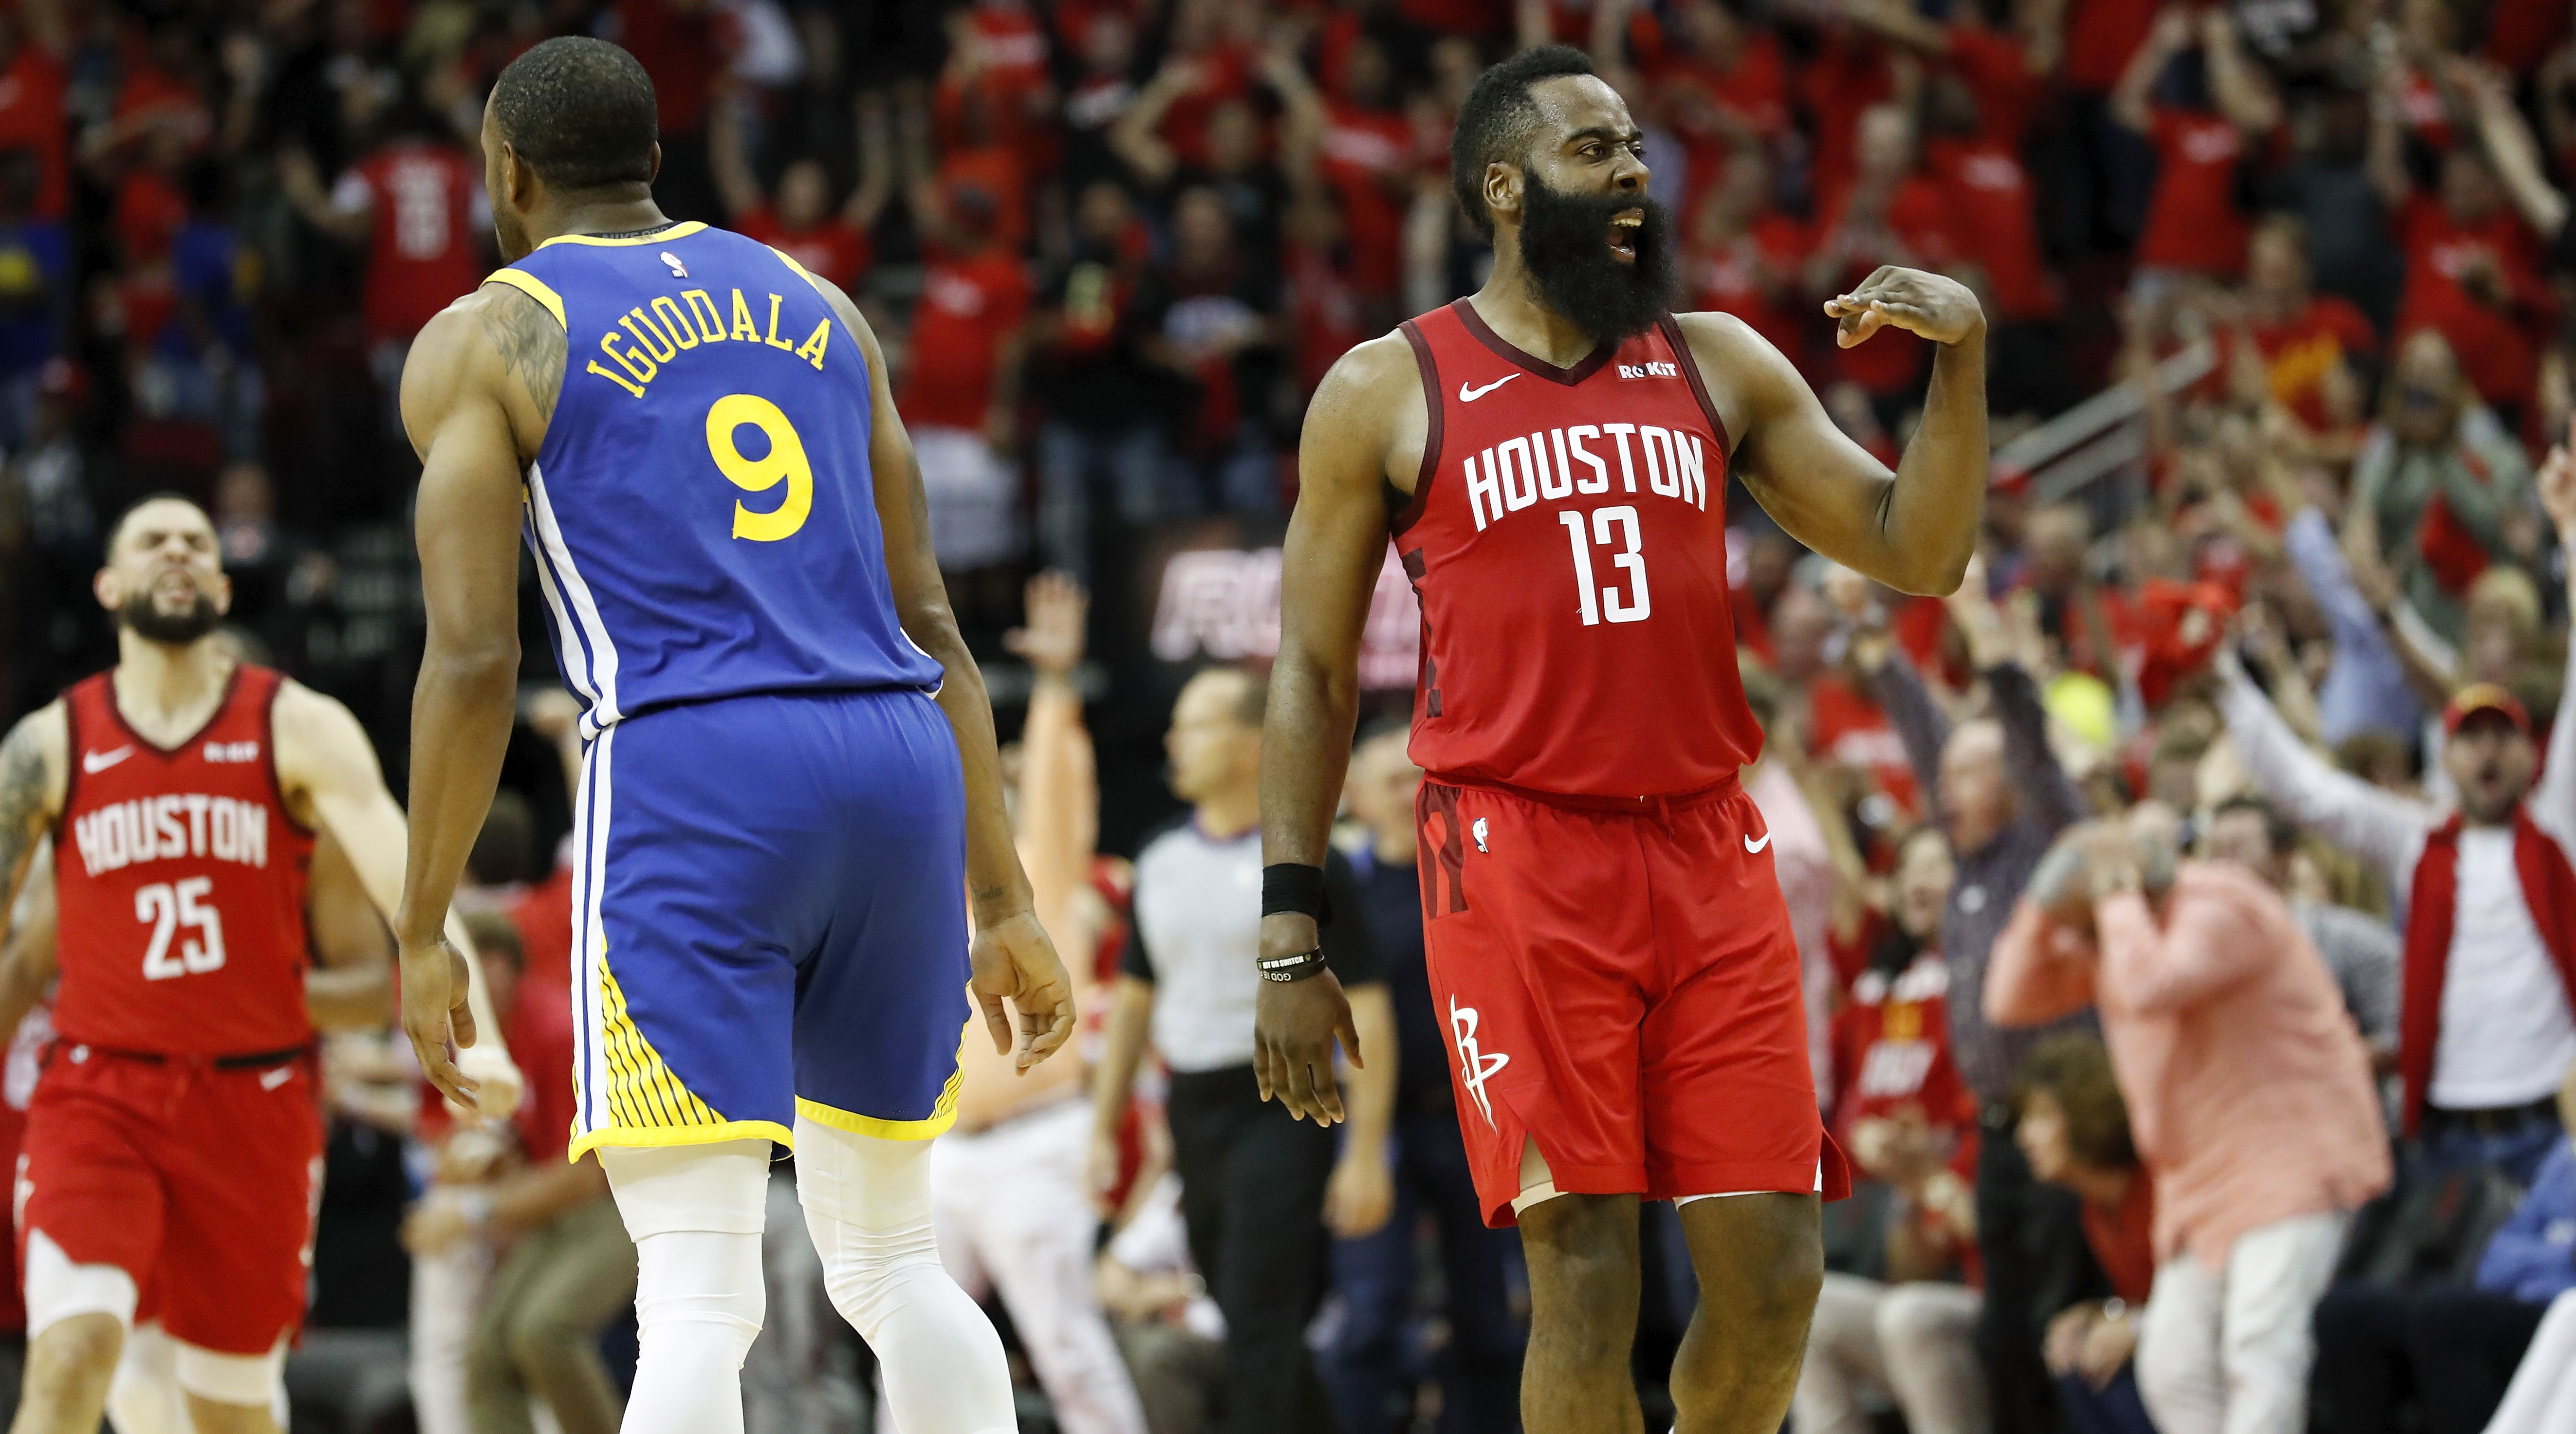 Warriors vs. Rockets Game Two: James Harden & Chris Paul Postgame, 2019  NBA Playoffs